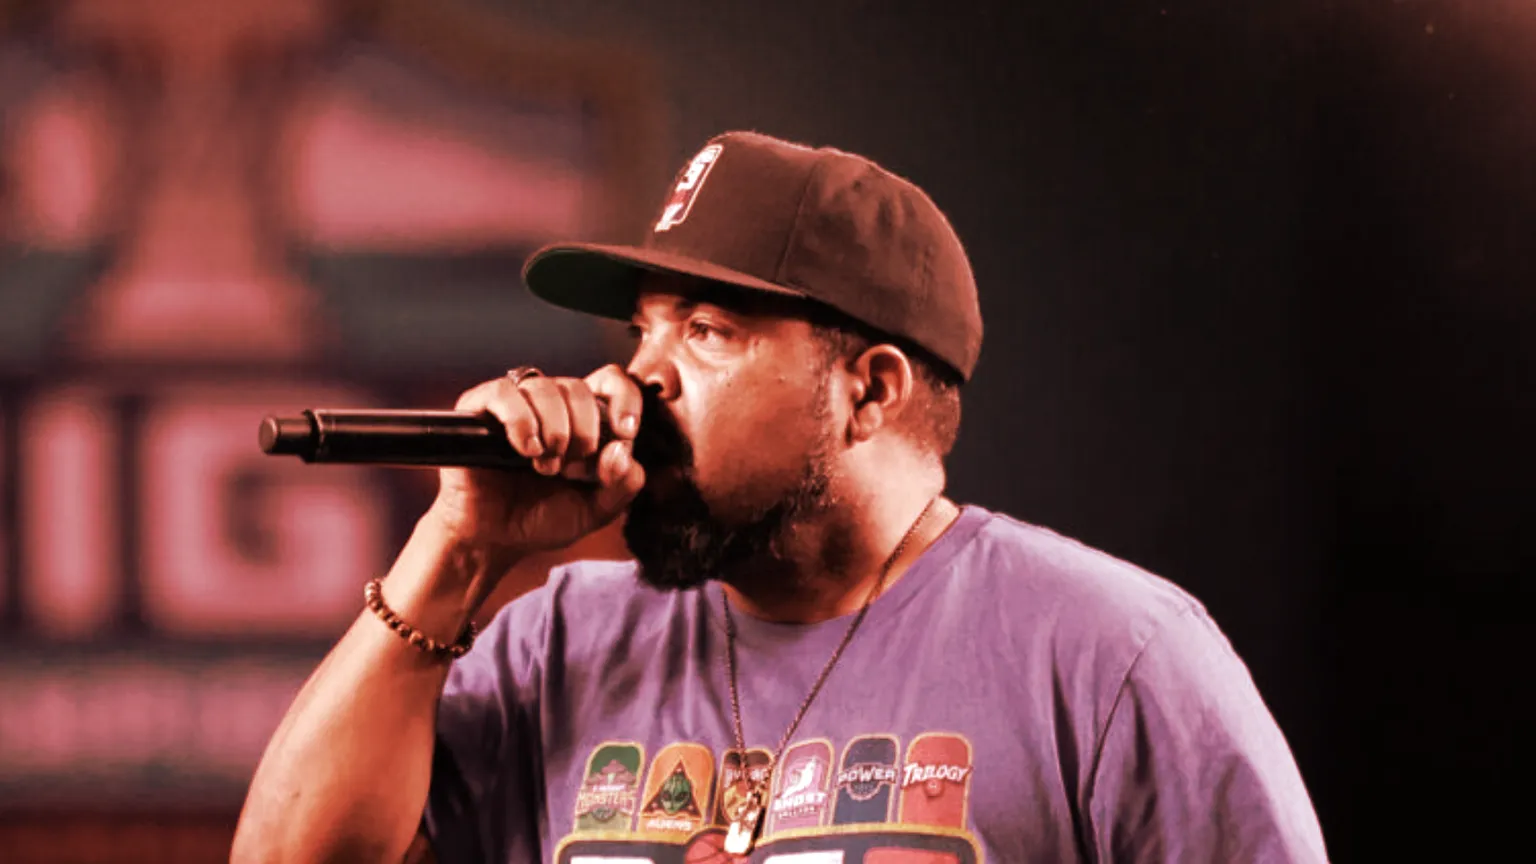 Rapper and BIG3 league co-founder Ice Cube. Image: BIG3